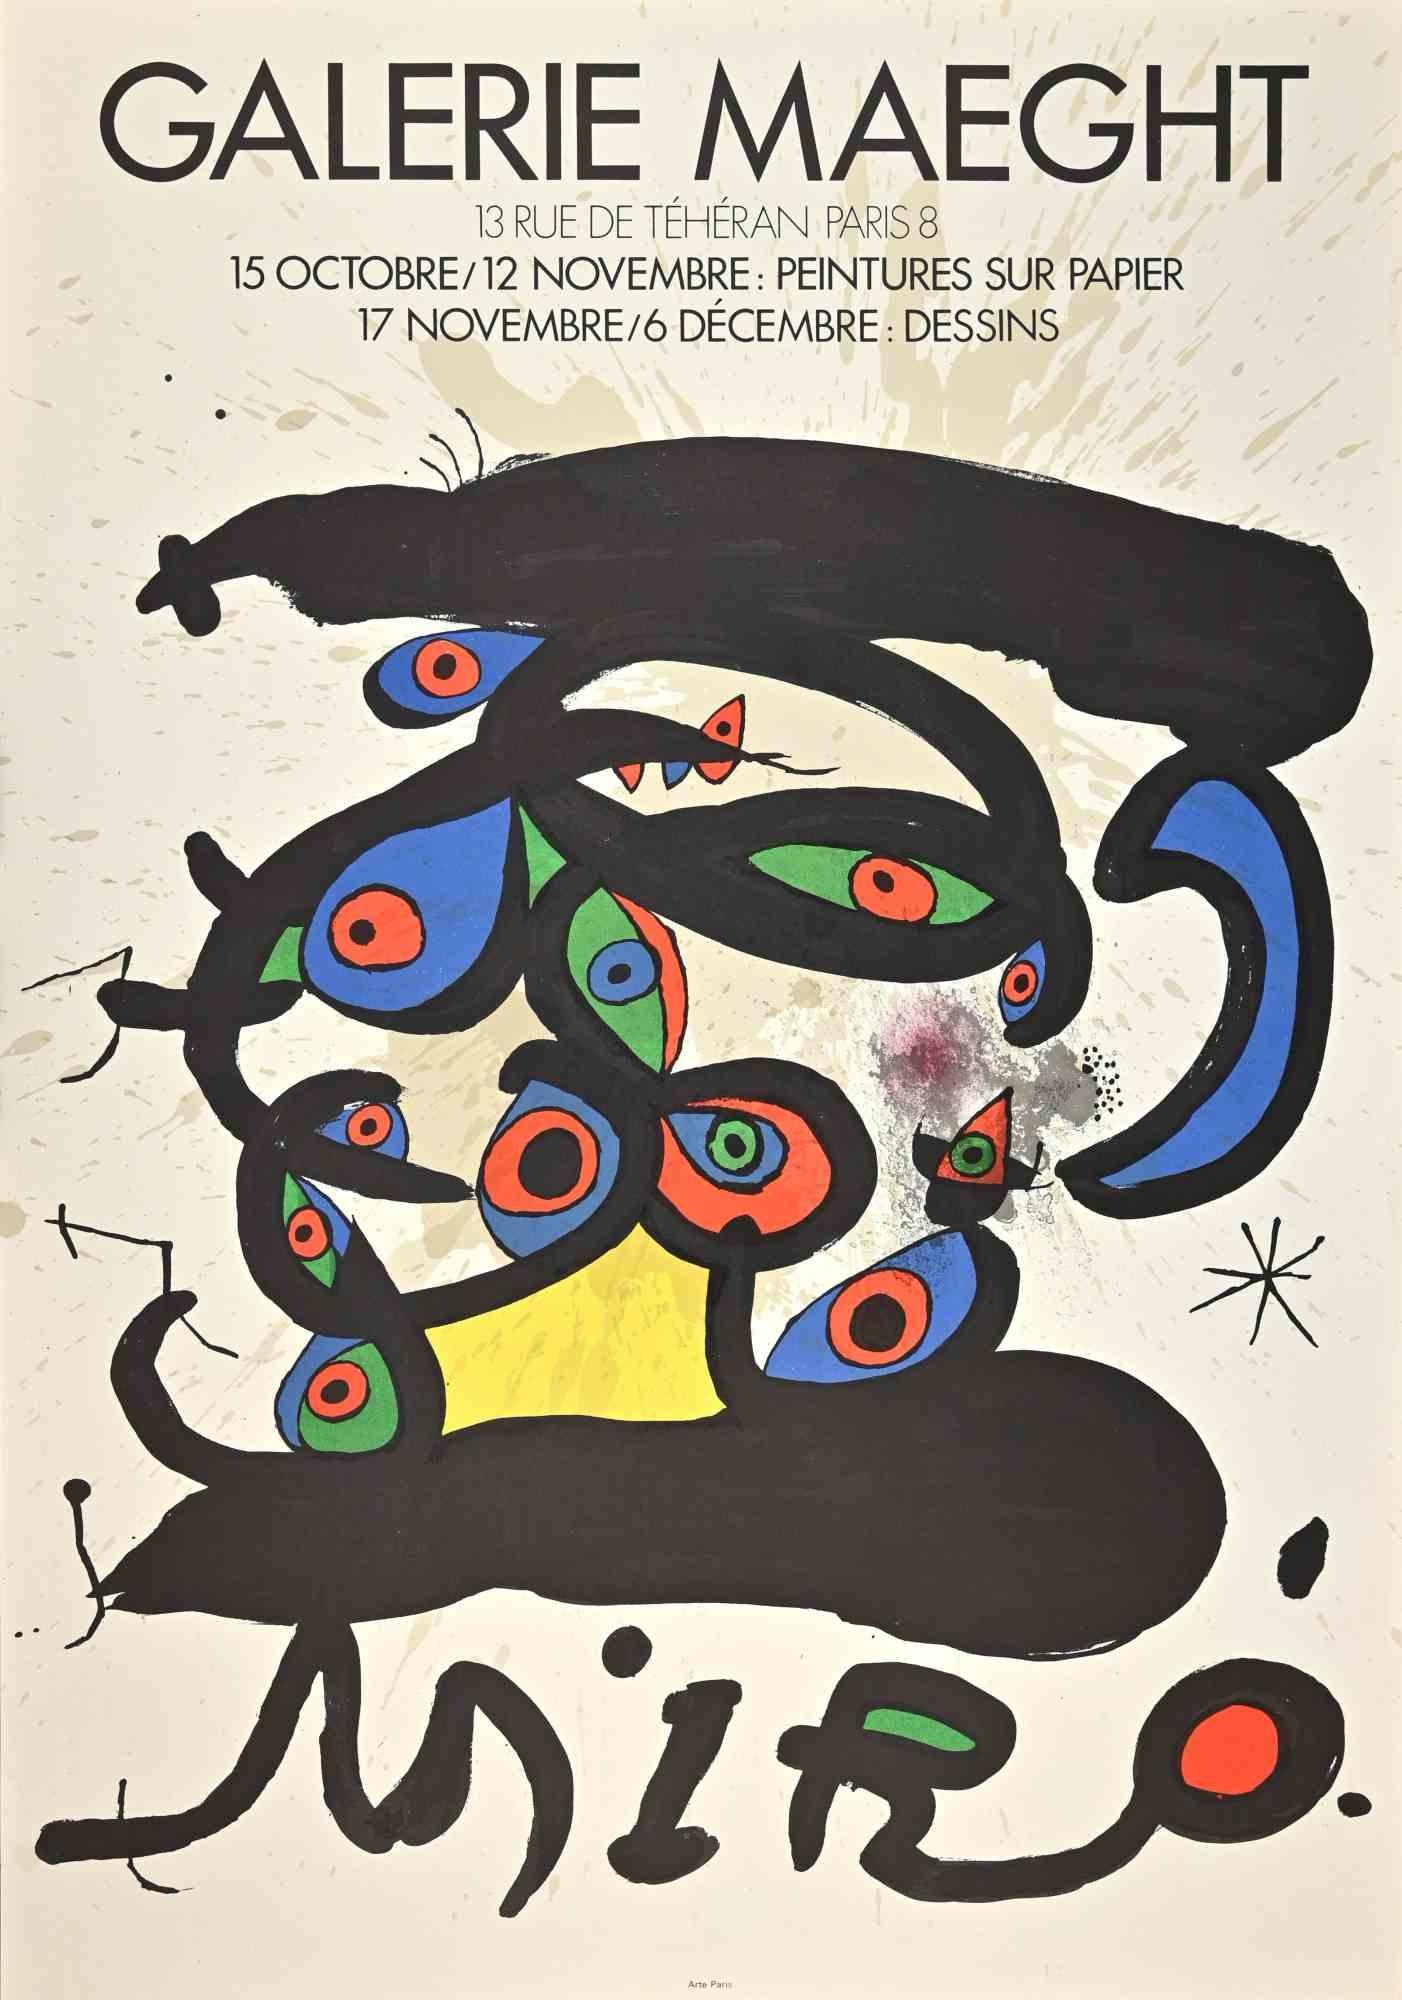 (after) Joan Miró Abstract Print - Vintage Poster Exhibition Galerie Maeght-Lithograph/Offset after J. Mirò-1970s